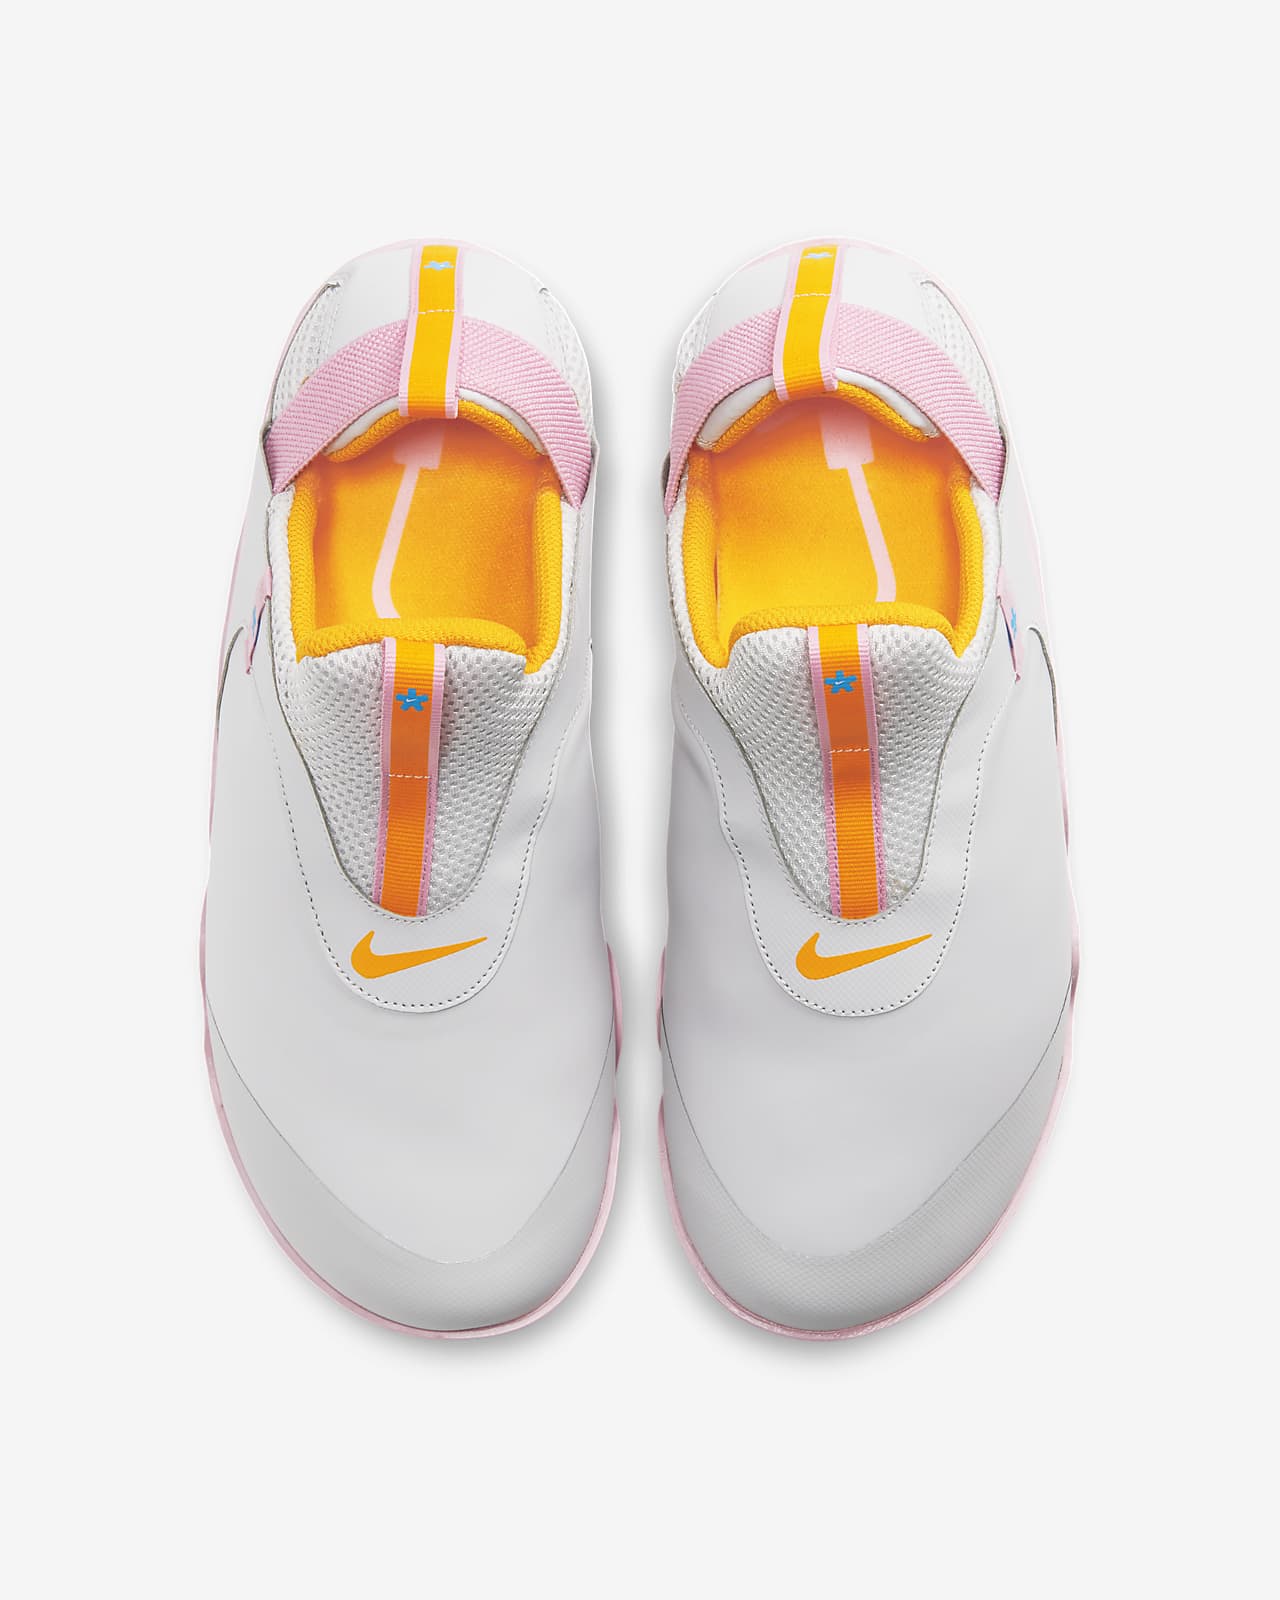 how much will the nike nurse shoes cost